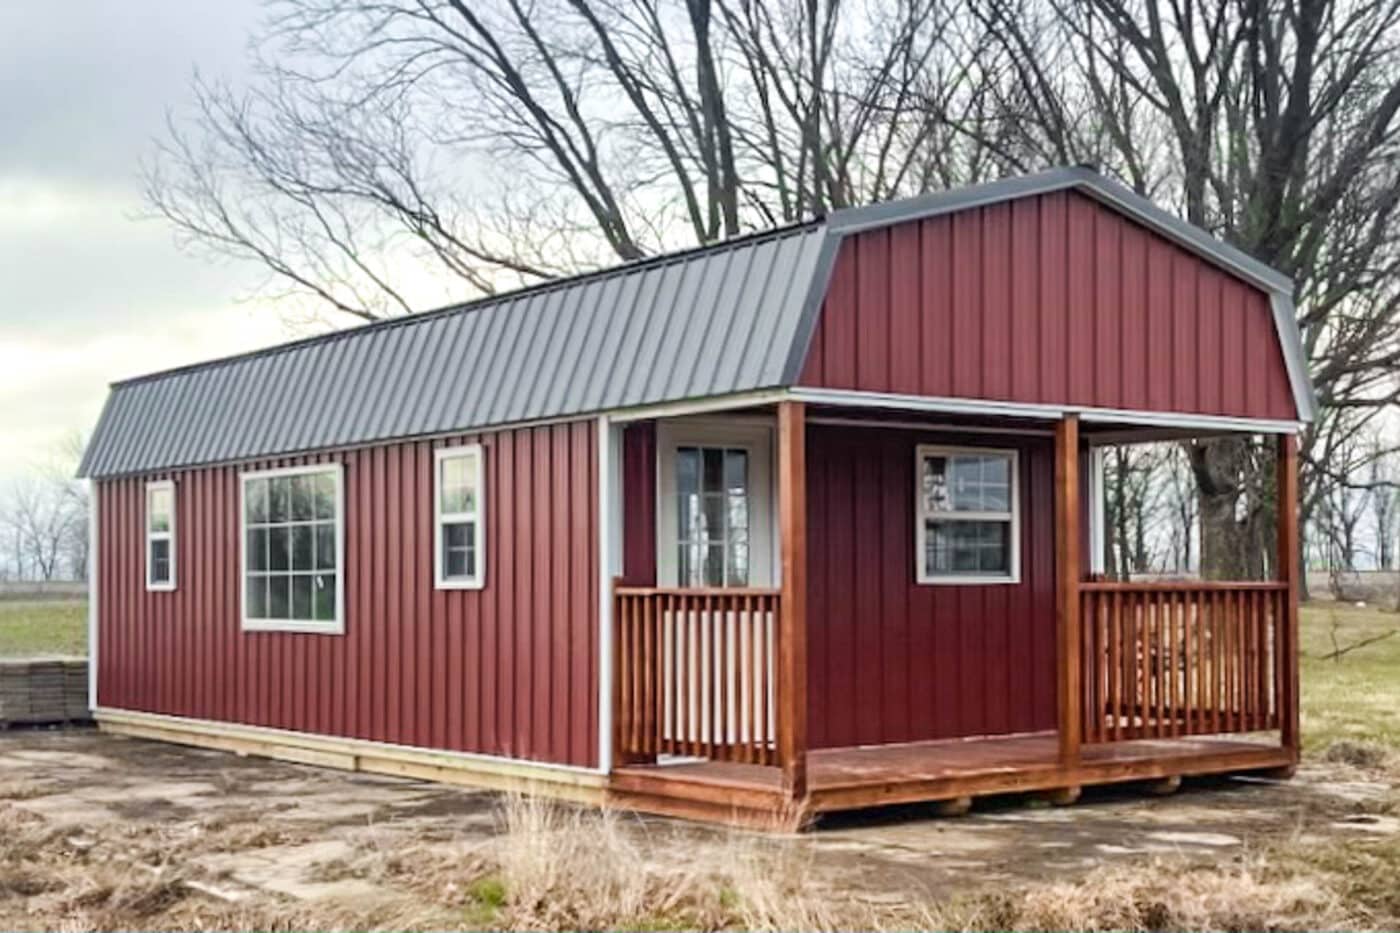 highwall lofted cabin built by Premier Barns in Missouri